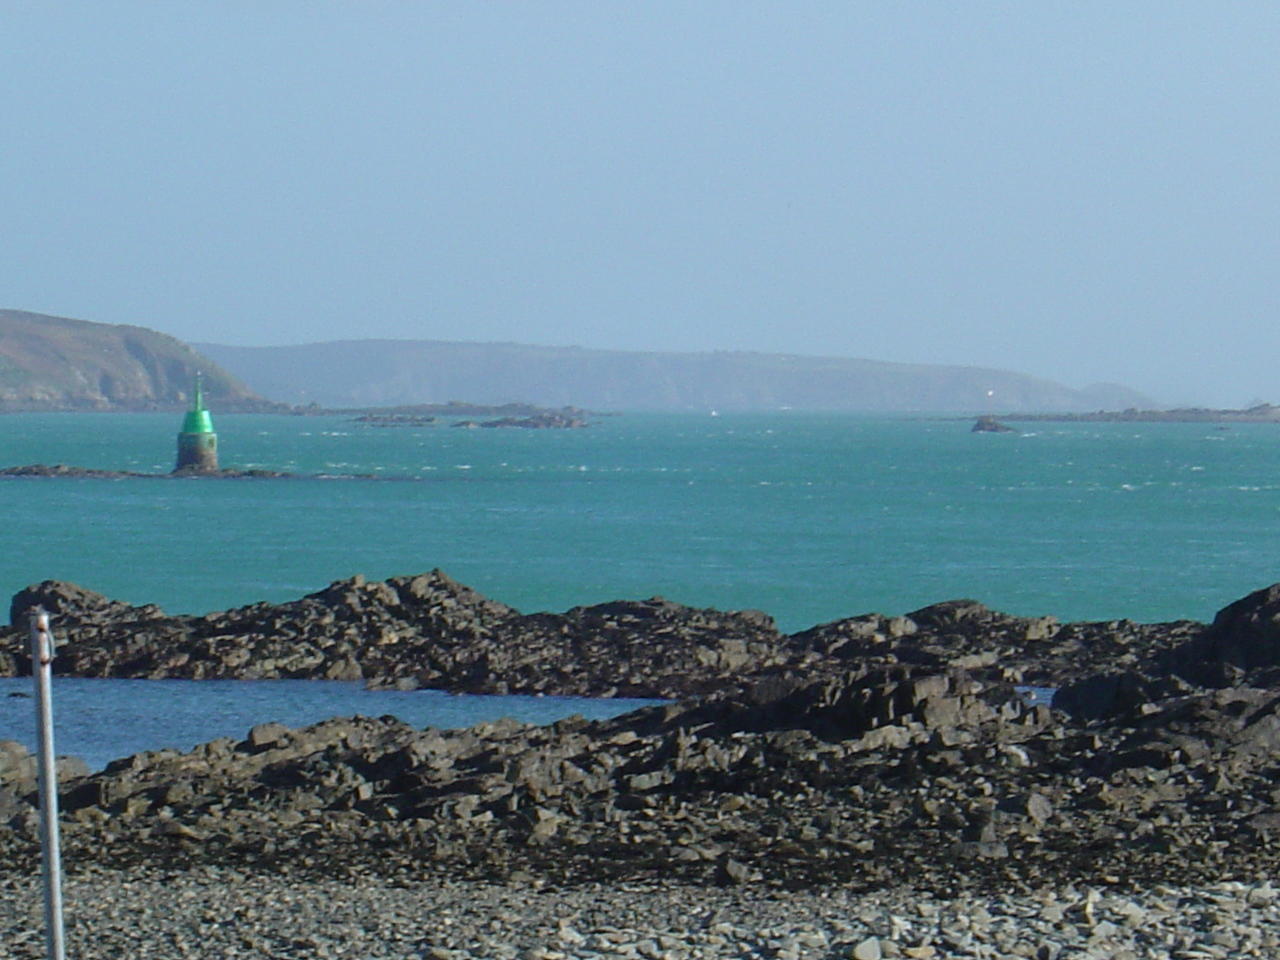 Island of Sark (In the far distance, around 9 miles)